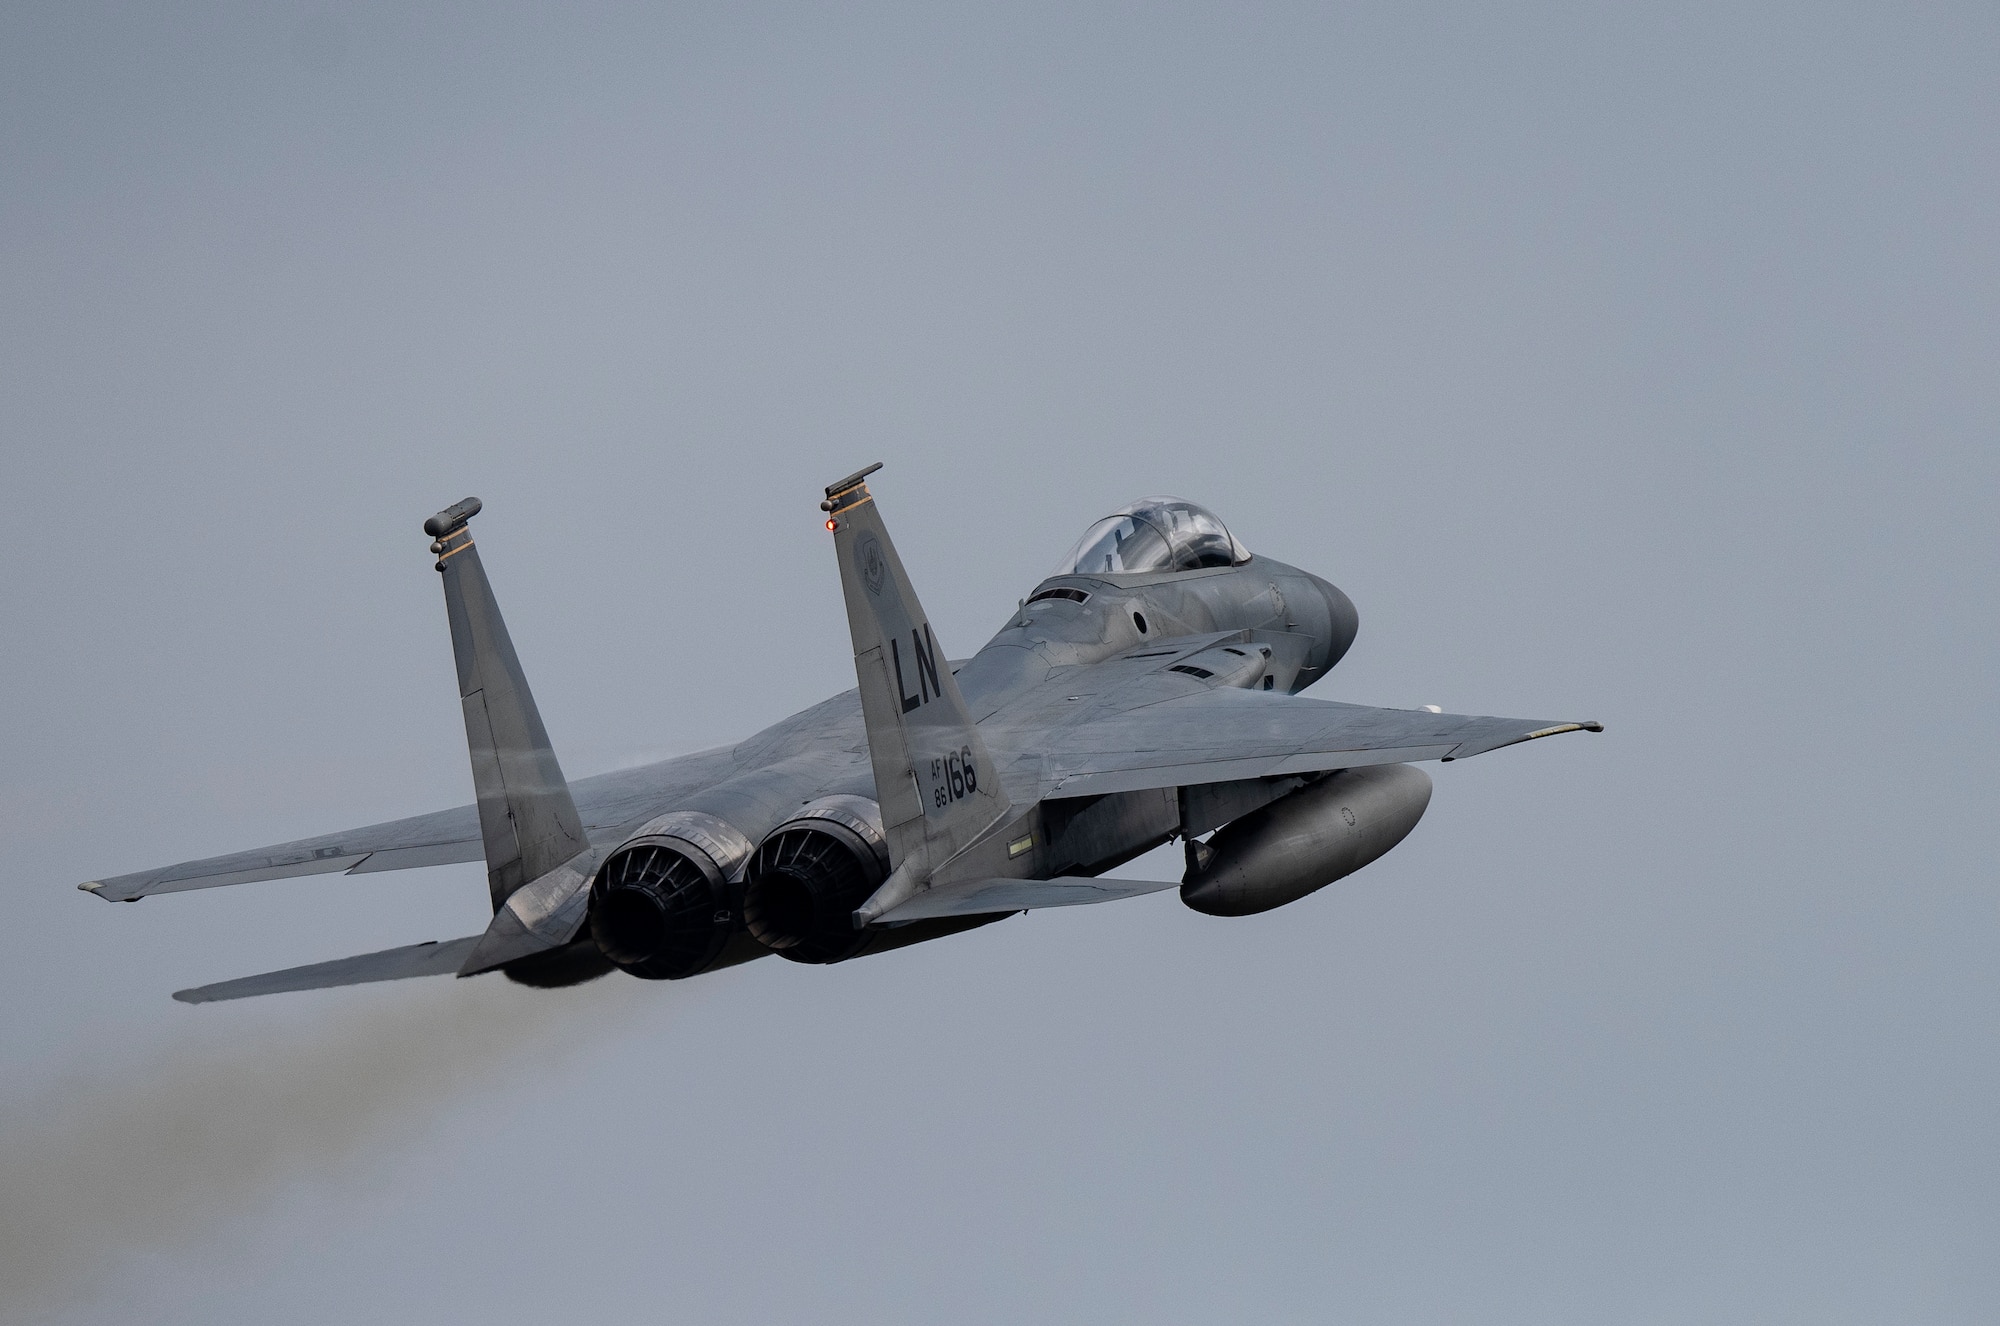 An F-15C Eagle, assigned to the 493rd Fighter Squadron, takes off in support of exercise Astral Knight 2020 at Royal Air Force Lakenheath, England, Sept. 21, 2020. AK20 is focused on multinational Integrated Air and Missile Defense assets and will feature fighter and surface-based air defense integration against air and cruise missile threats. (U.S. Air Force photo by Airman 1st Class Jessi Monte)